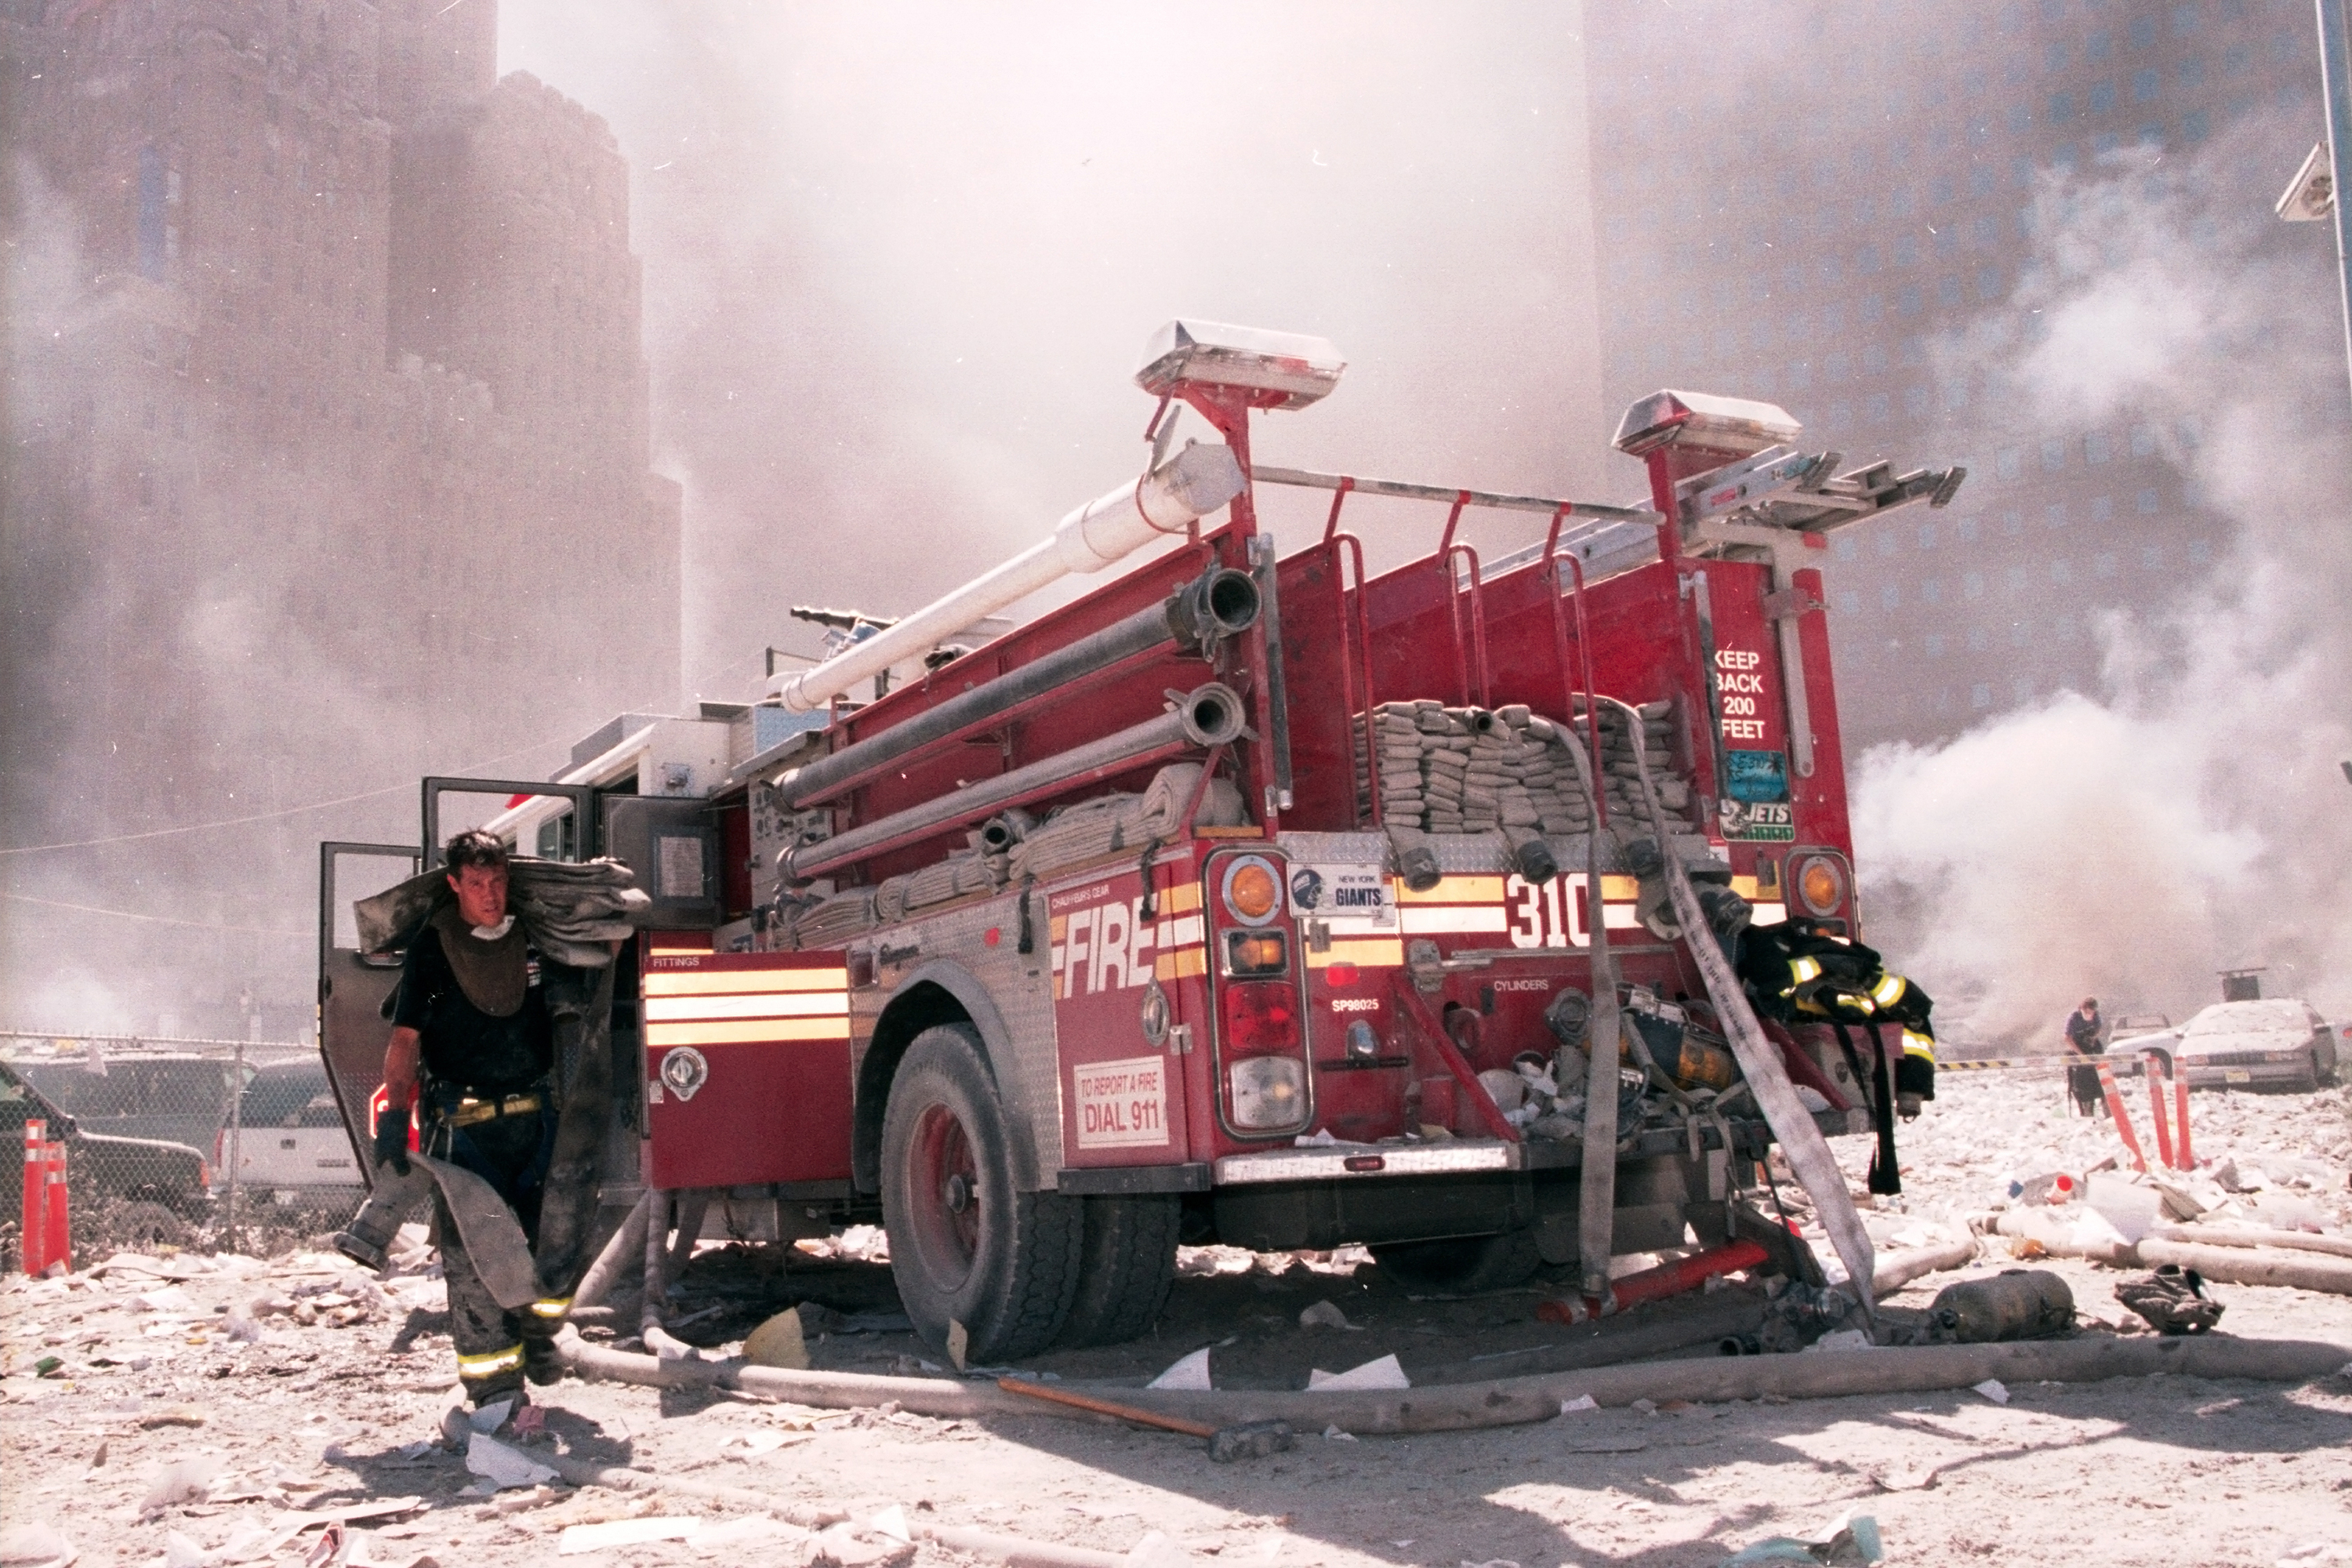 Engine 310 in the aftermath of the World Trade Center collapse on Sept 11th, 2001